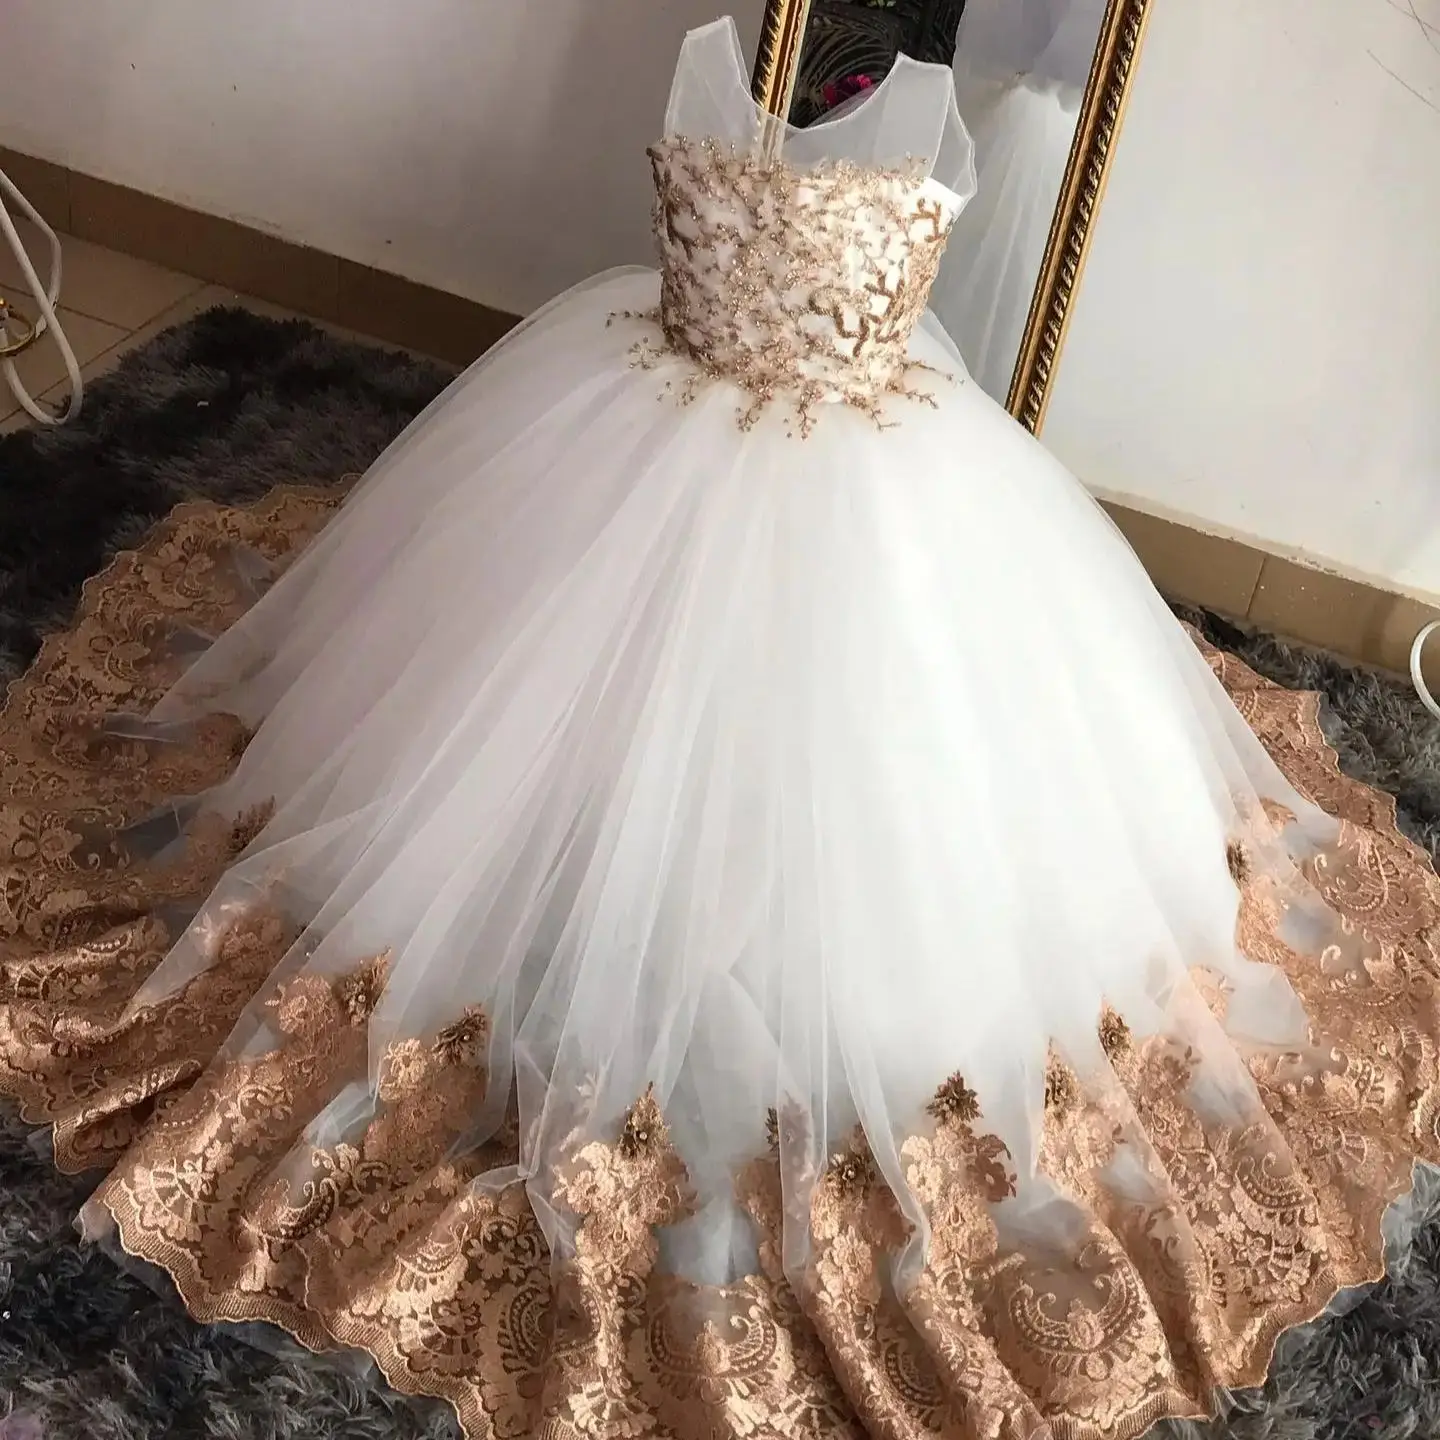 

White Tulle Flower Girl Dresses Champagne Lace Appliqued Girls Birthday Gowns Floor Length First Communion Dress Photography